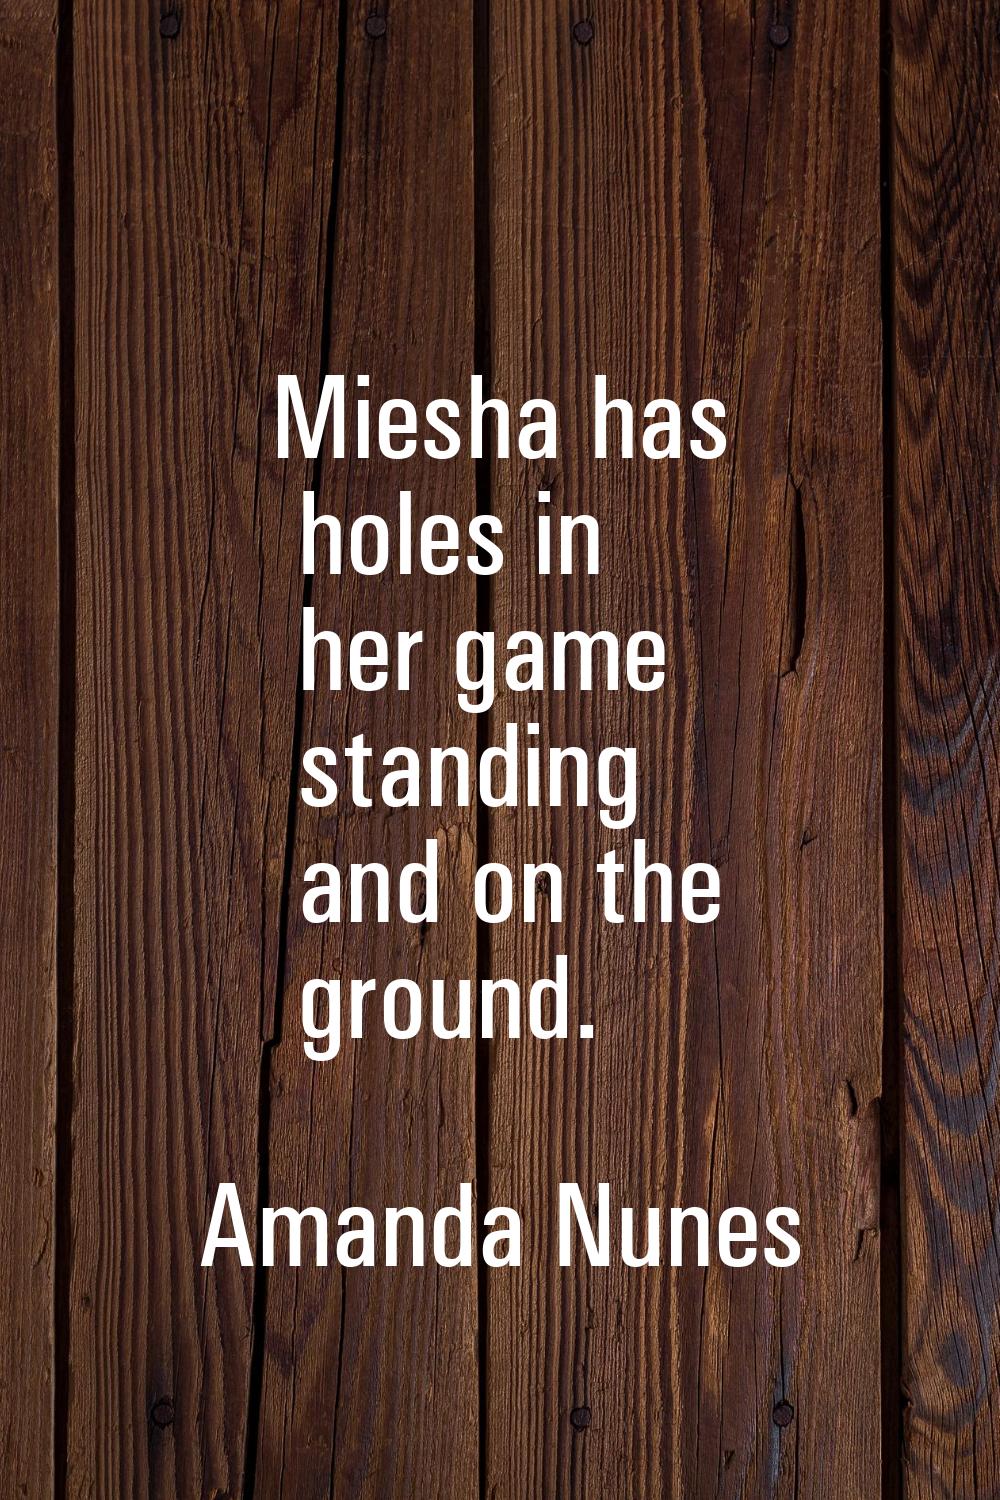 Miesha has holes in her game standing and on the ground.